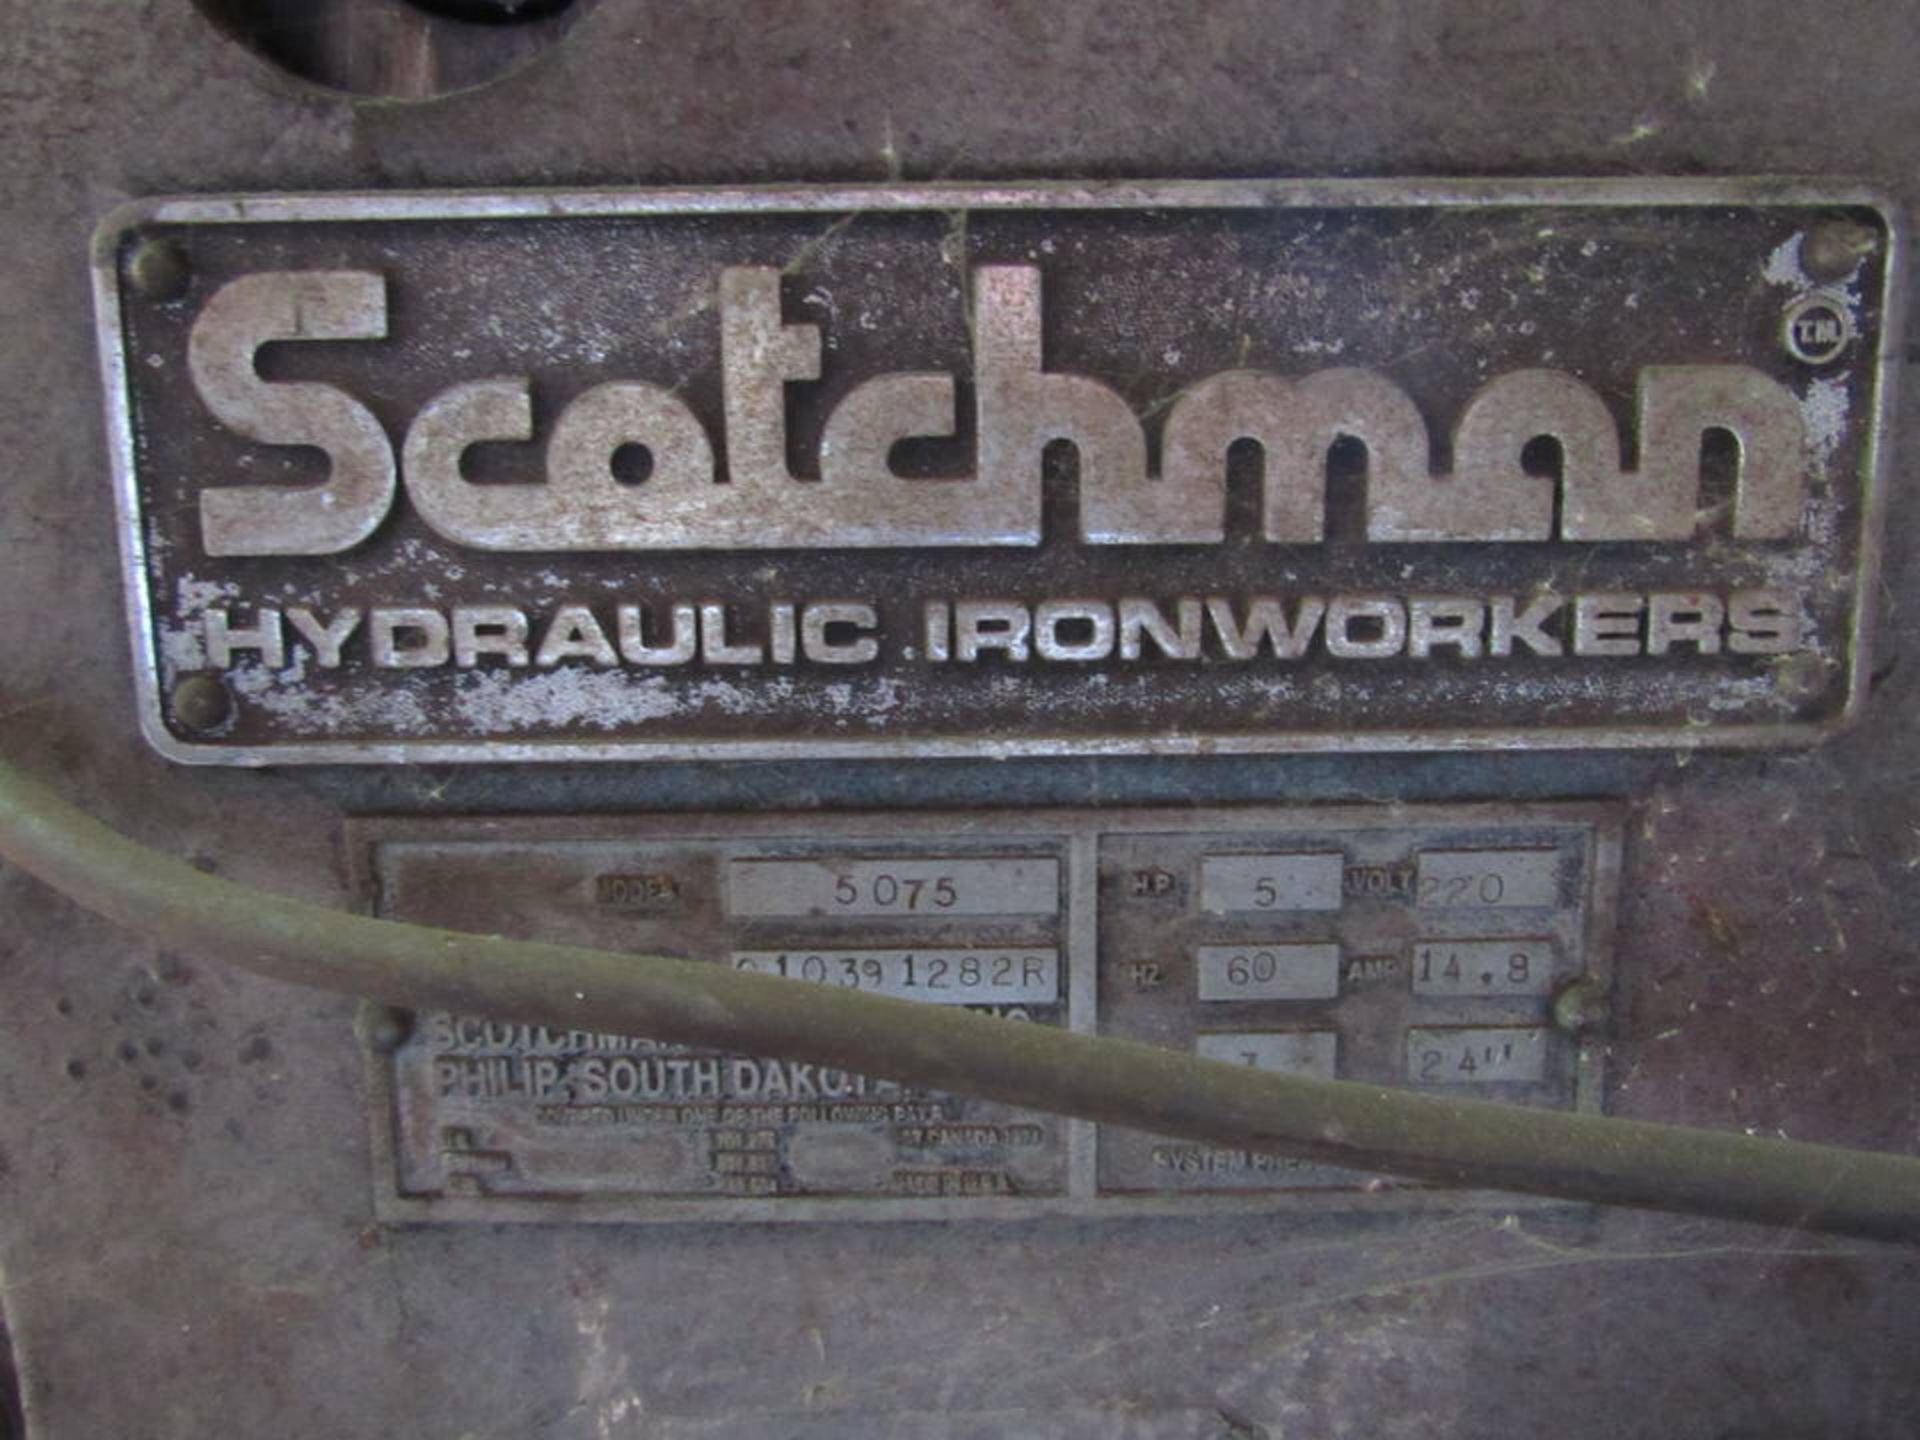 Scotchman Model 5075 Iron Worker - Image 7 of 8